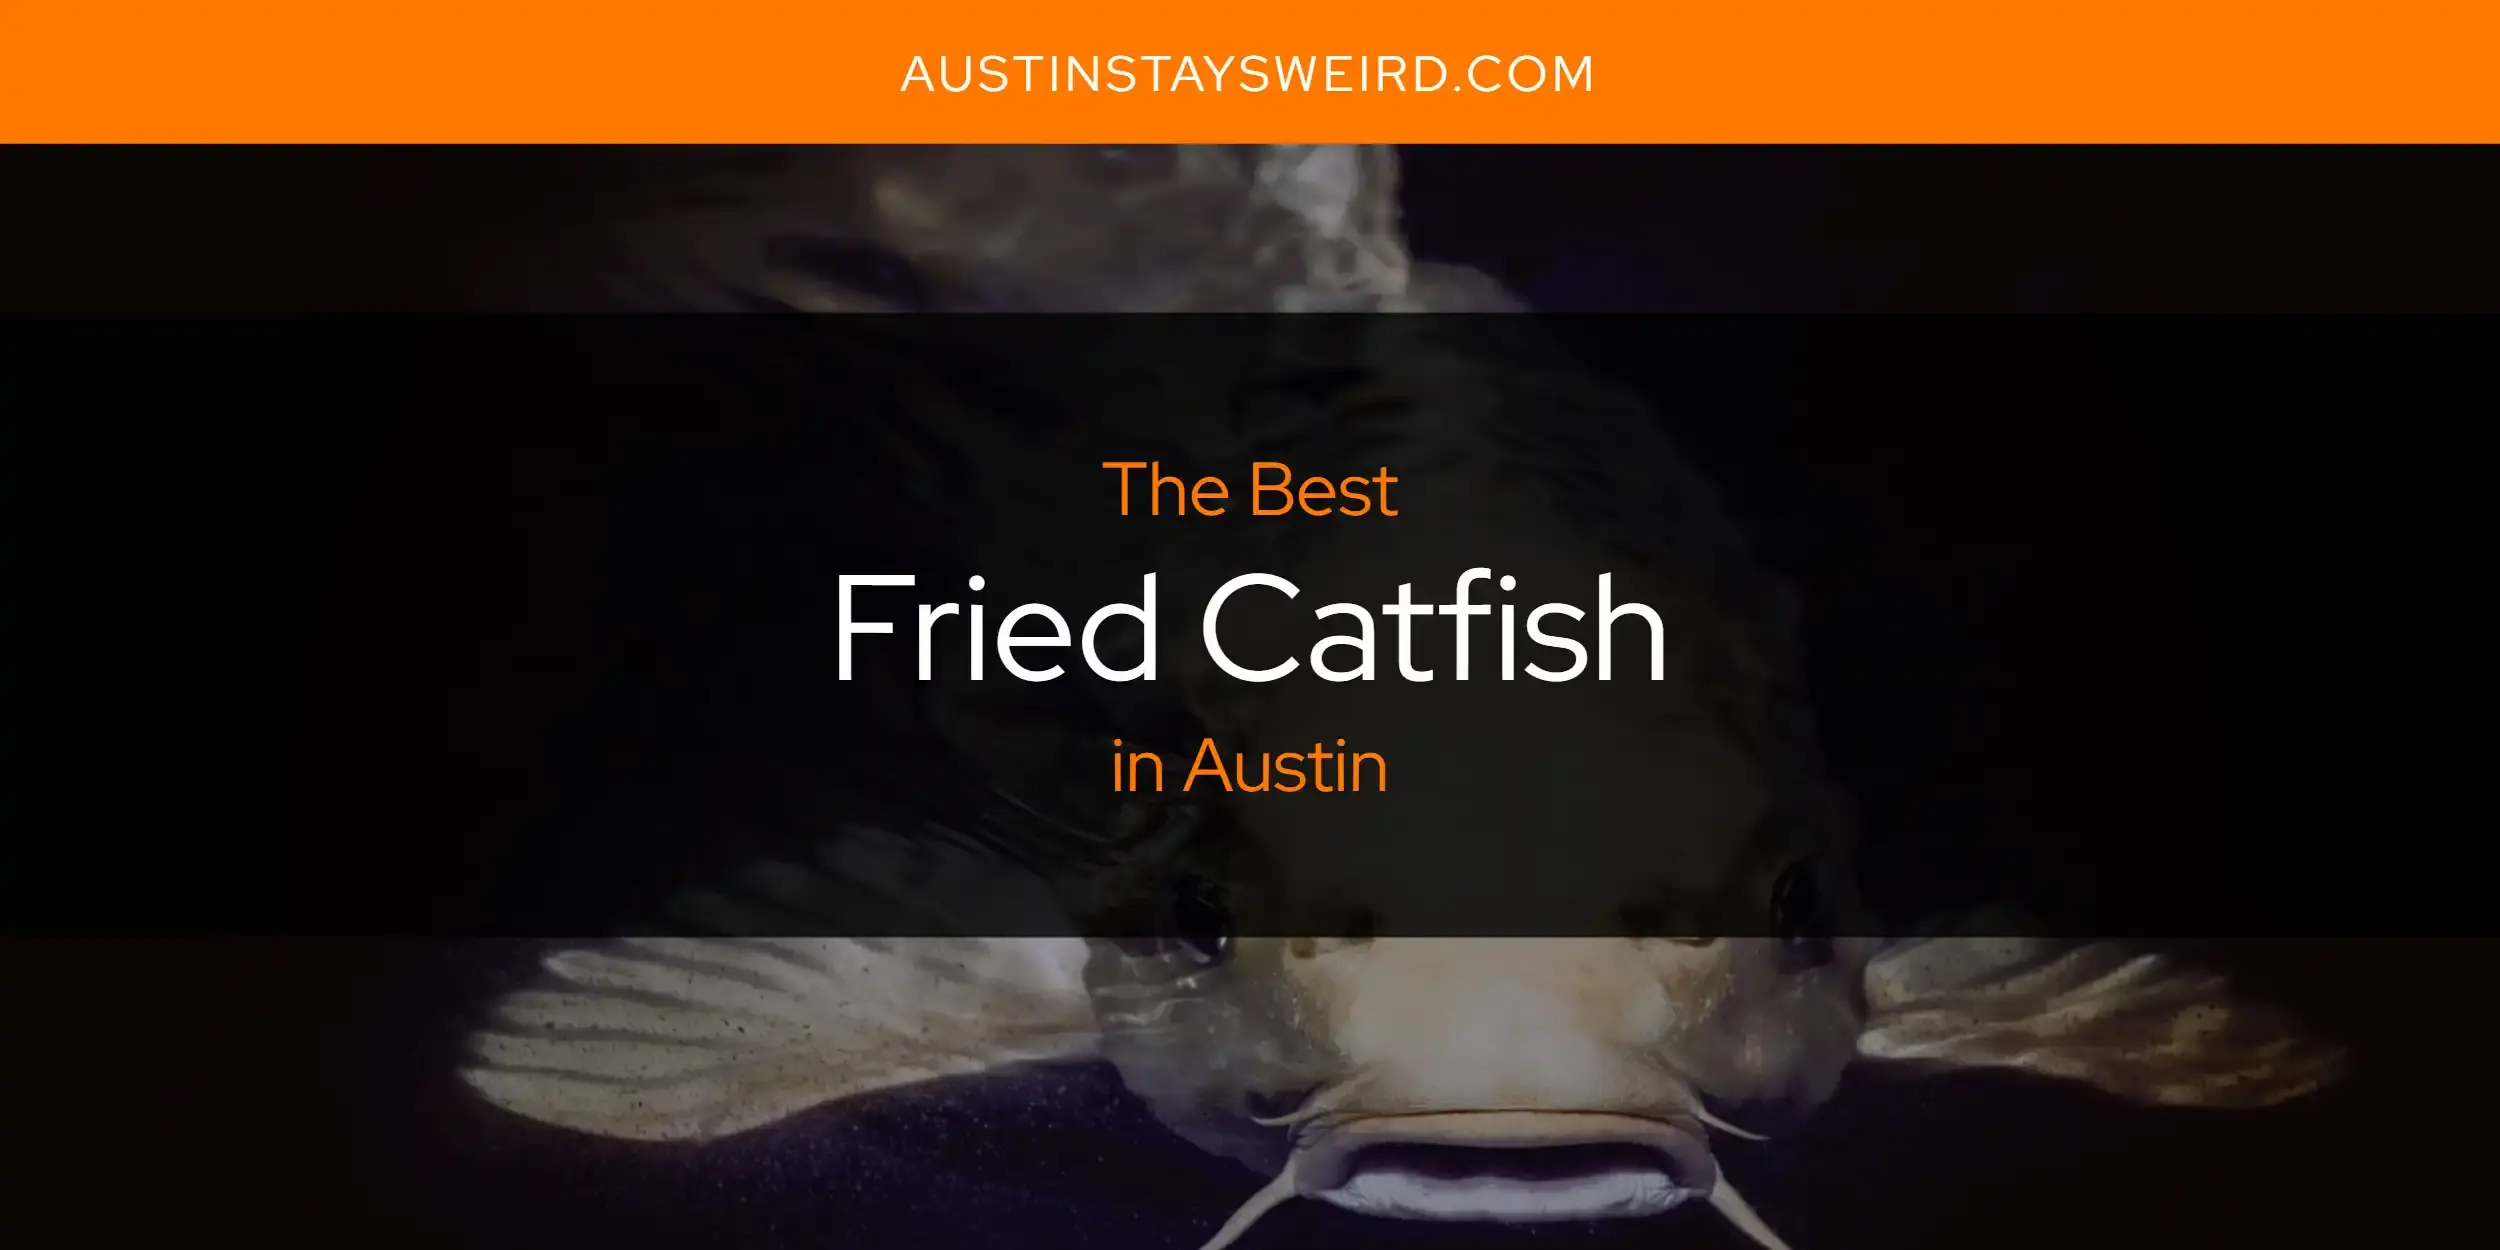 Best Fried Catfish in Austin? Here's the Top 8